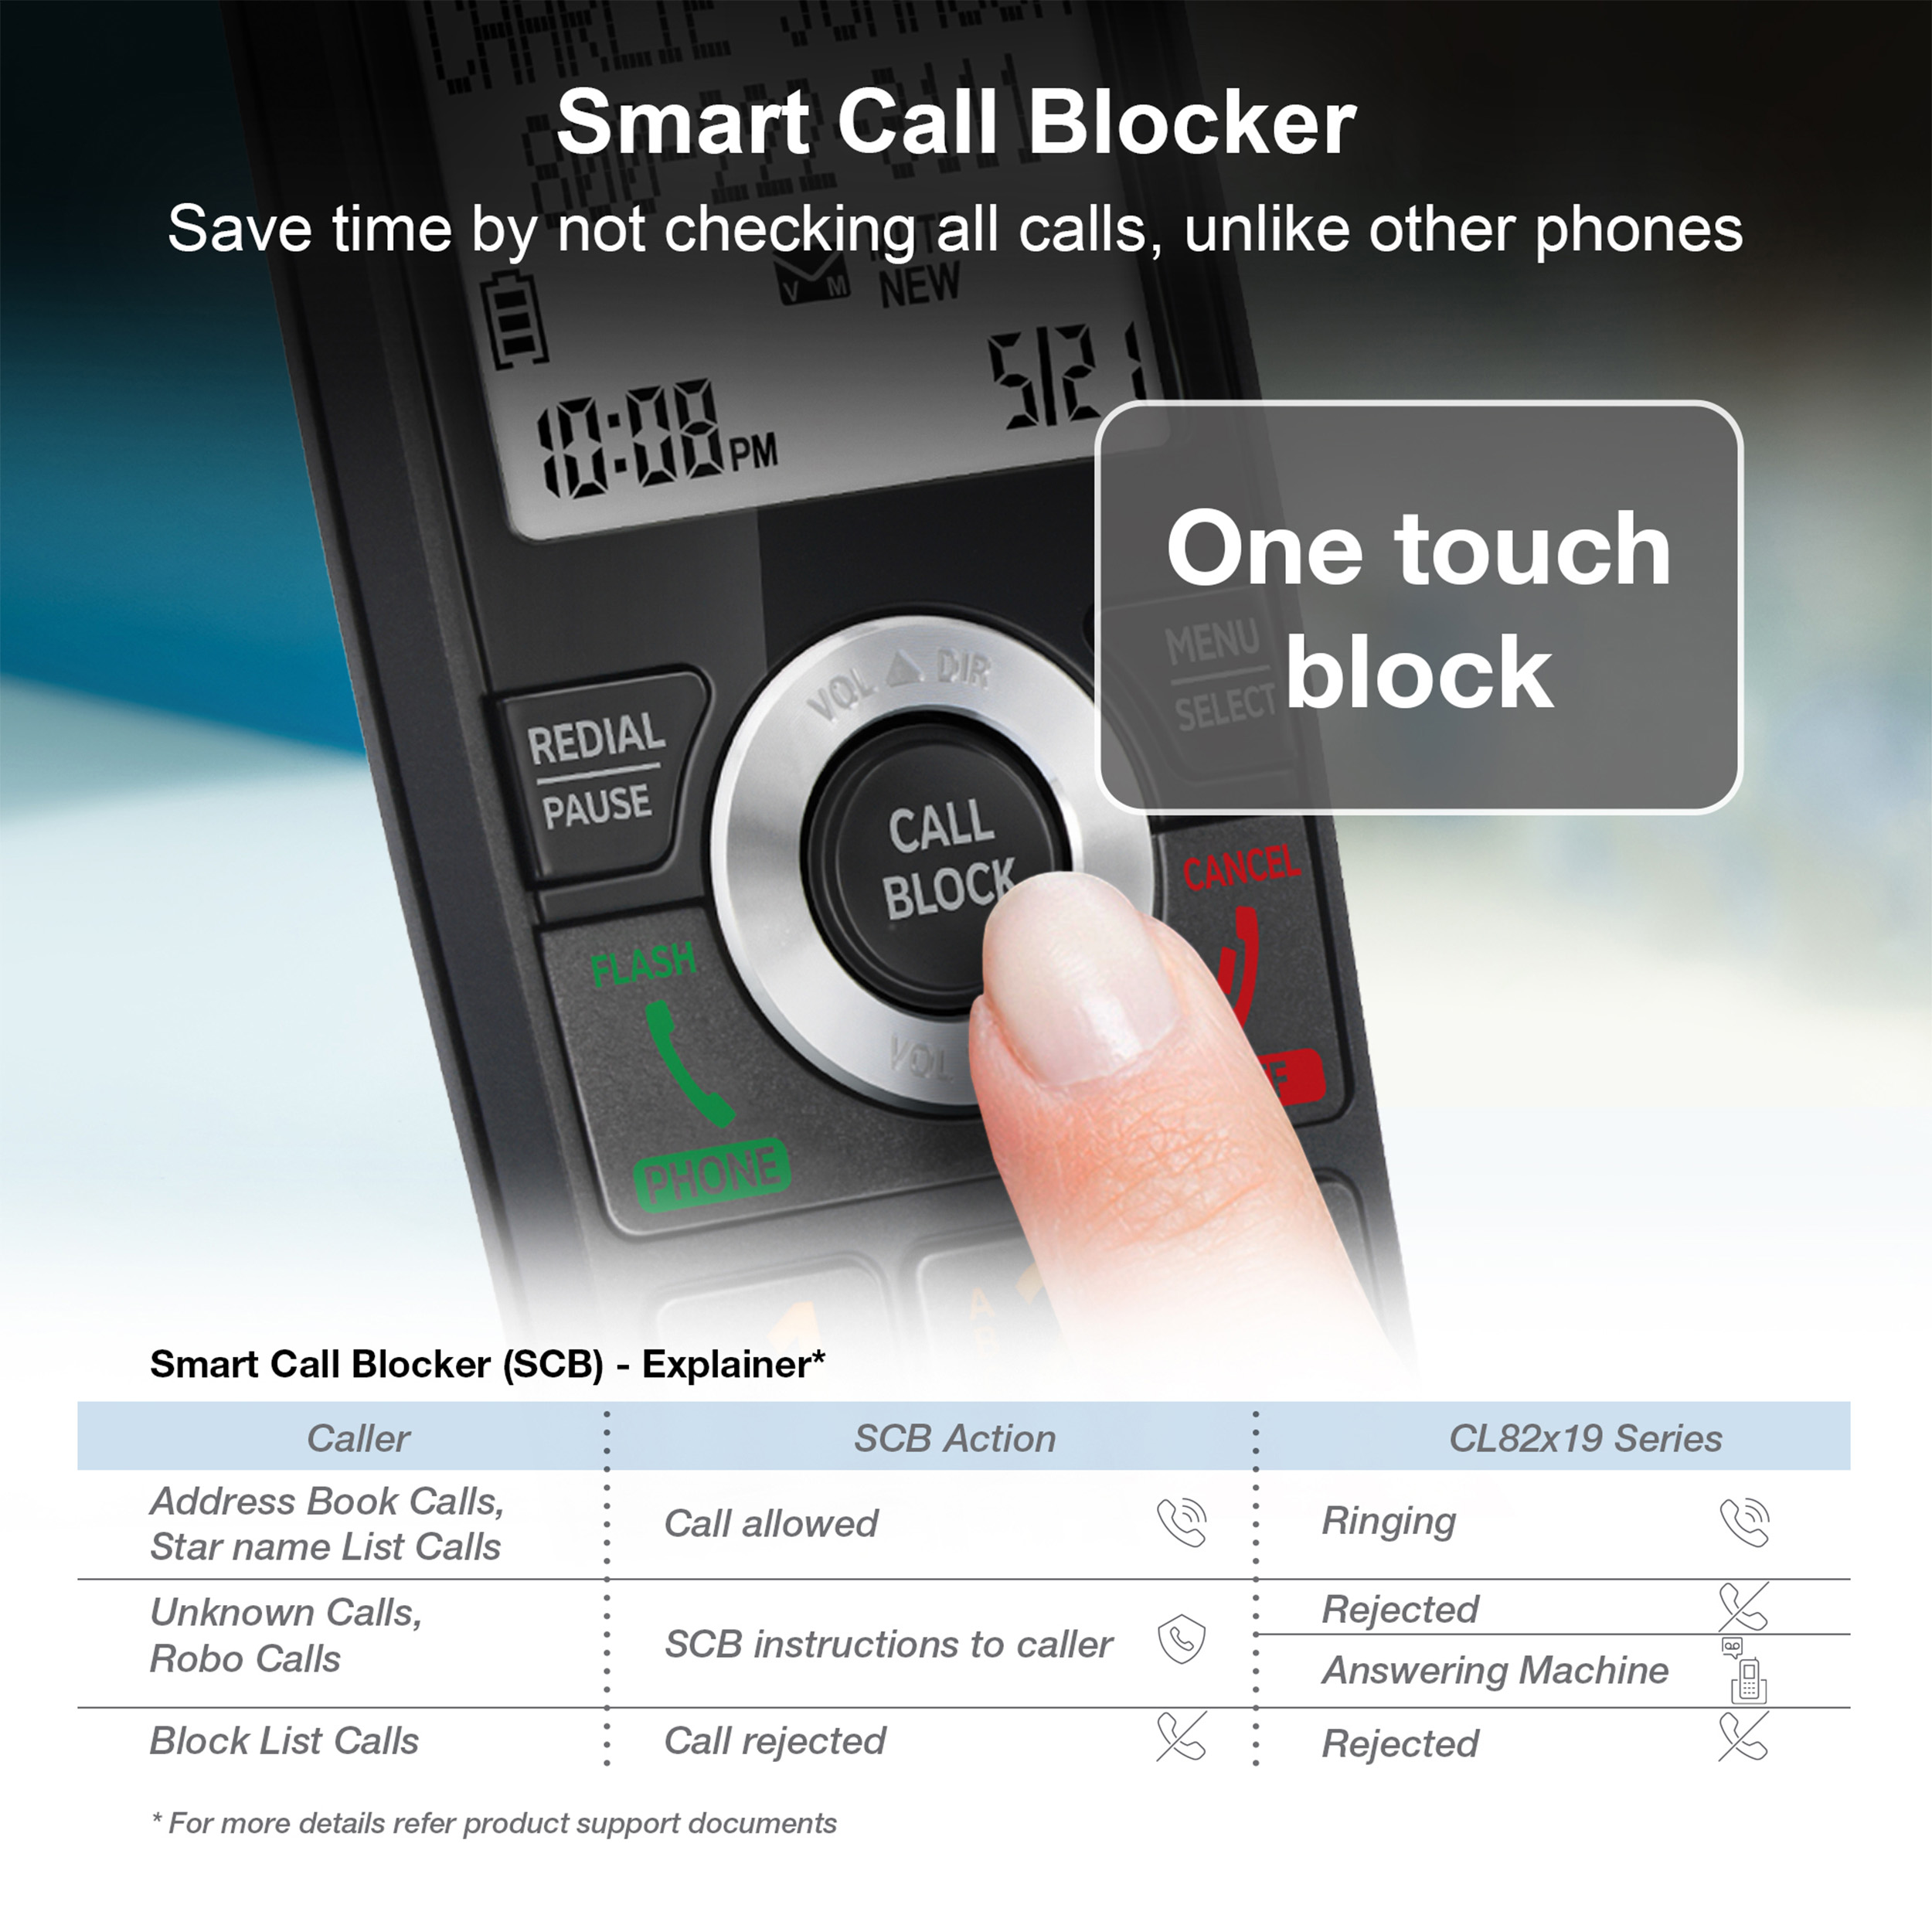 5-Handset Expandable Cordless Phone with Unsurpassed Range, Smart Call Blocker and Answering System - view 10